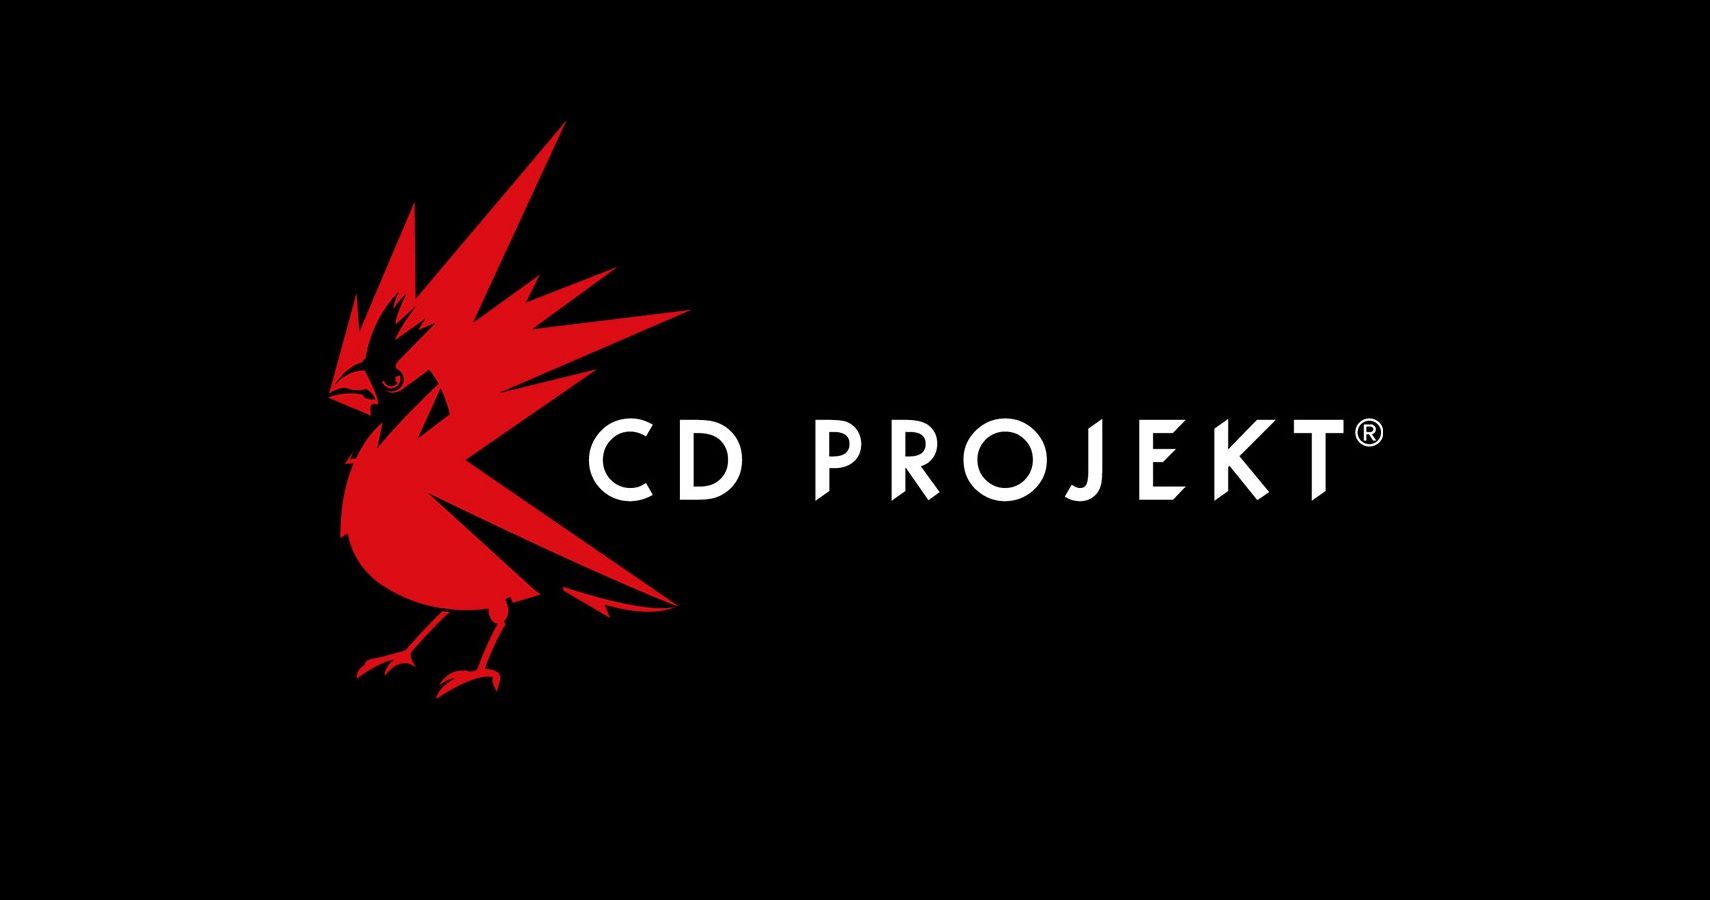 CD Projekt Plans To Remain Independent Wont Sell To Larger Entity